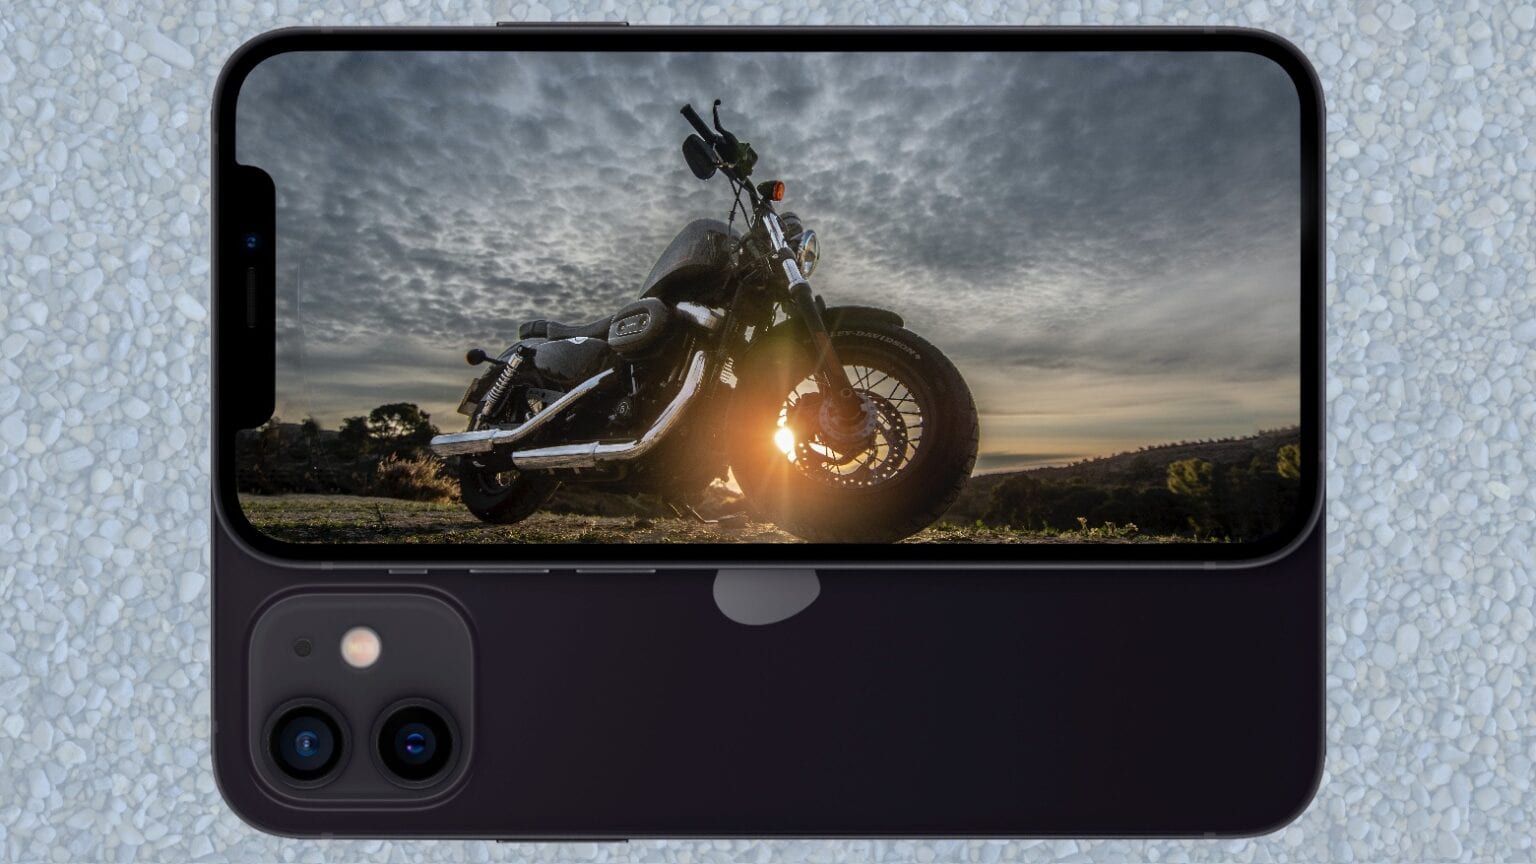 Motorcycles can permanently screw up your iPhone camera